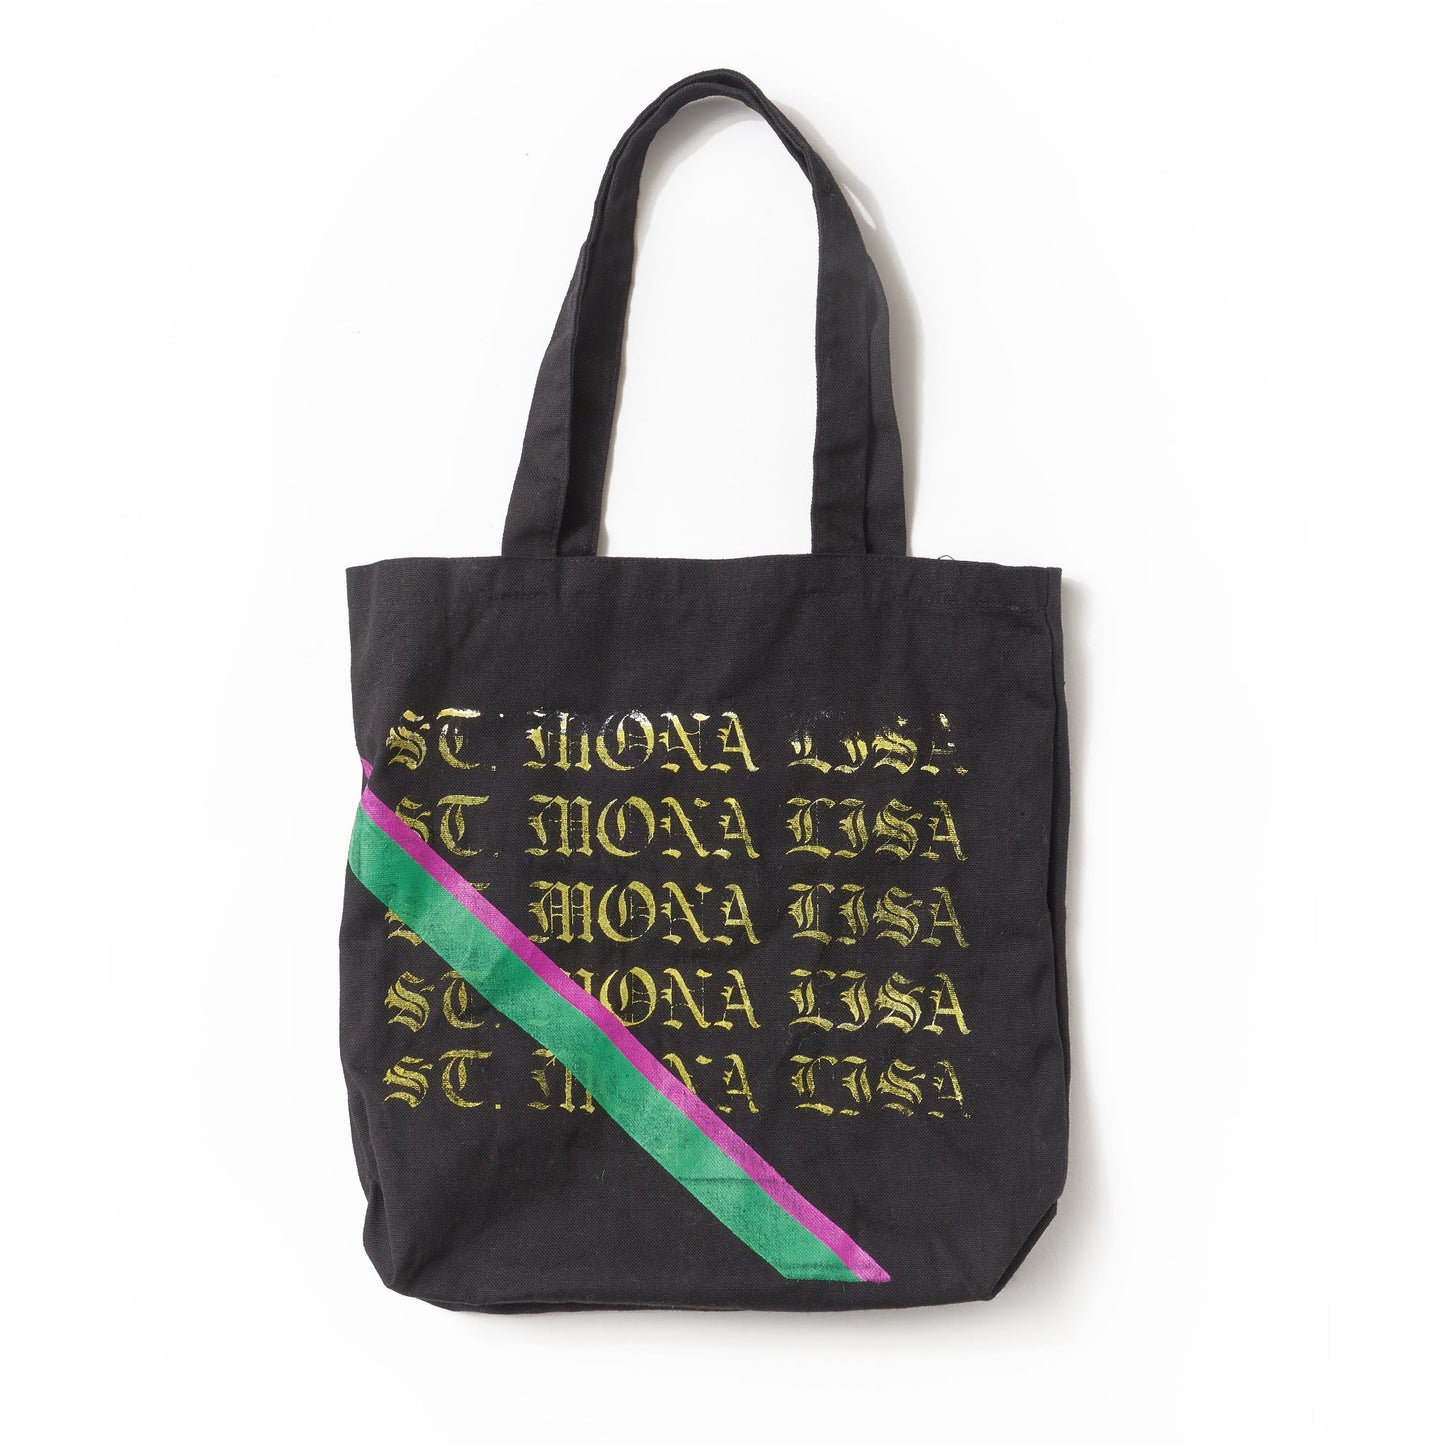 St Mona Lisa, Hand Painted Totes